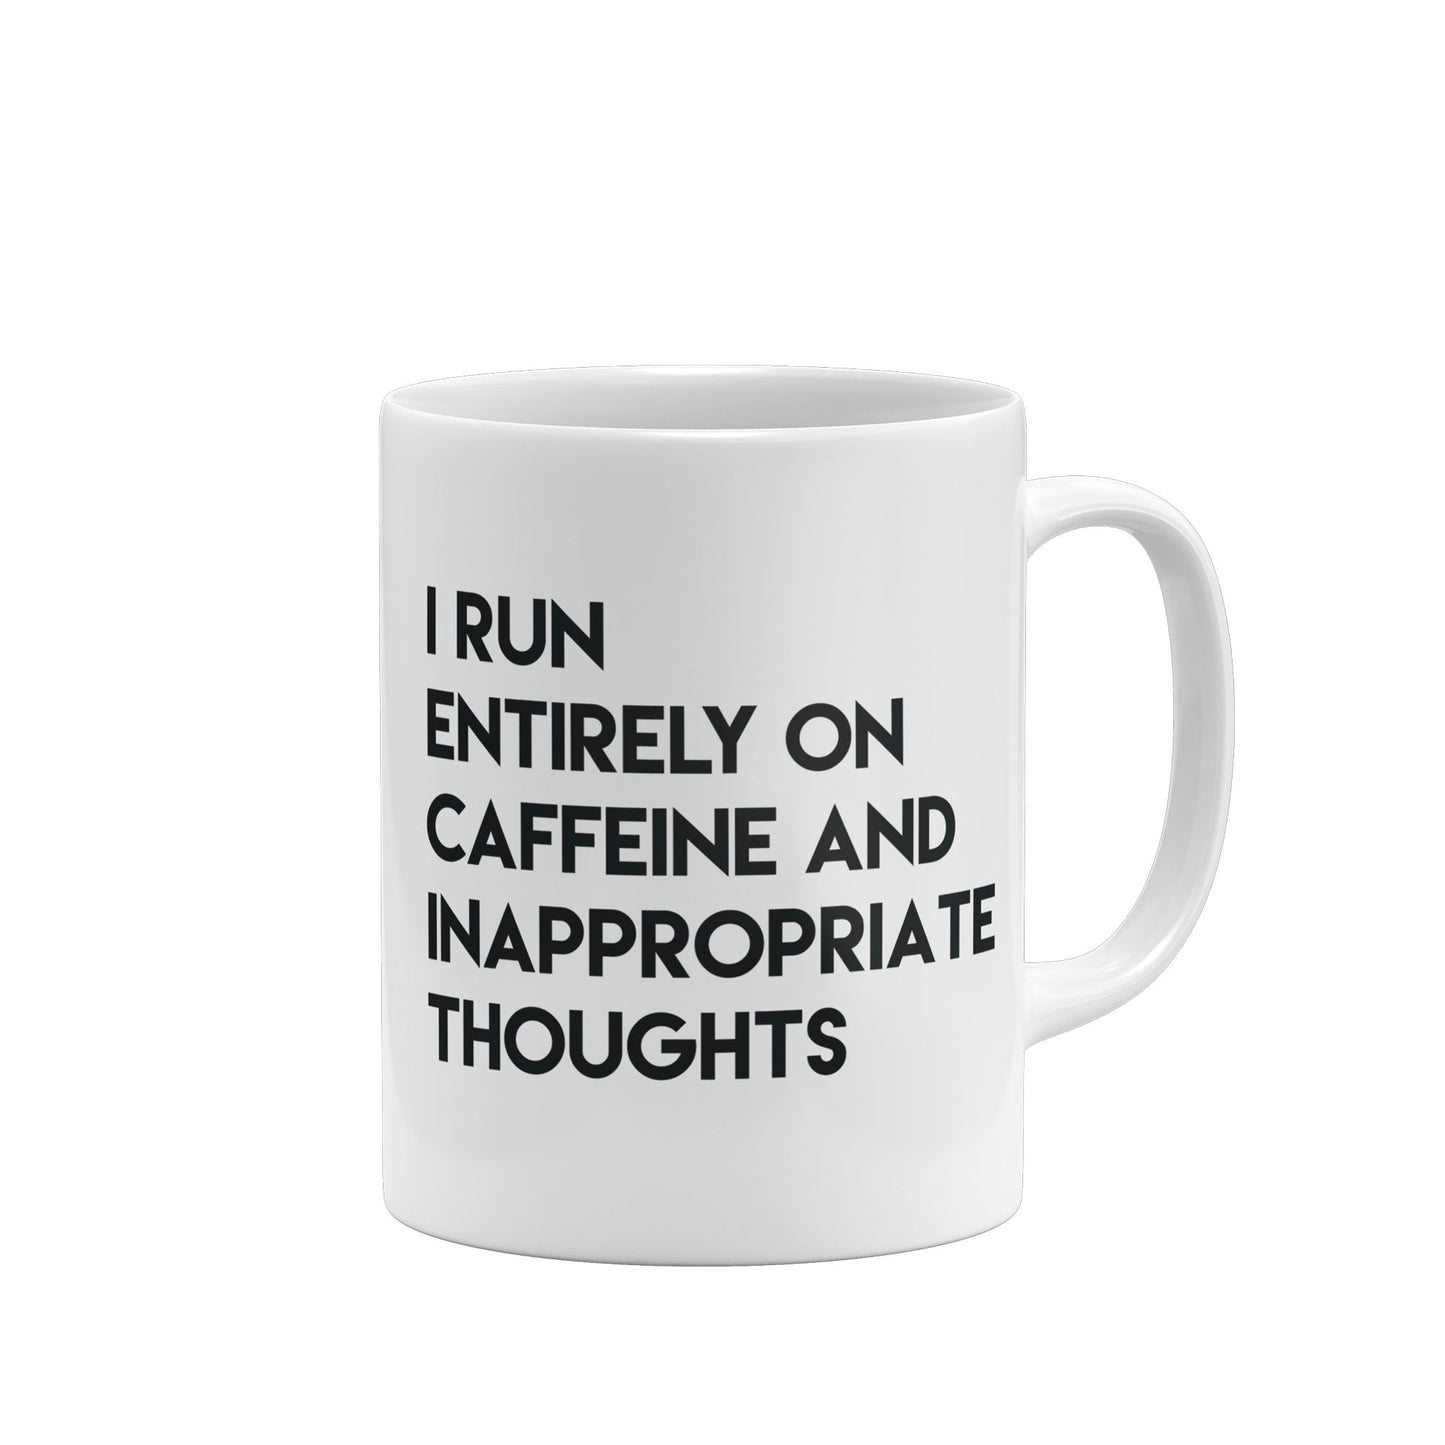 Load image into Gallery viewer, Funny Mug Caffeine and Inappropriate Thoughts Funny Mug-Mugs-Crimson and Clover Studio
